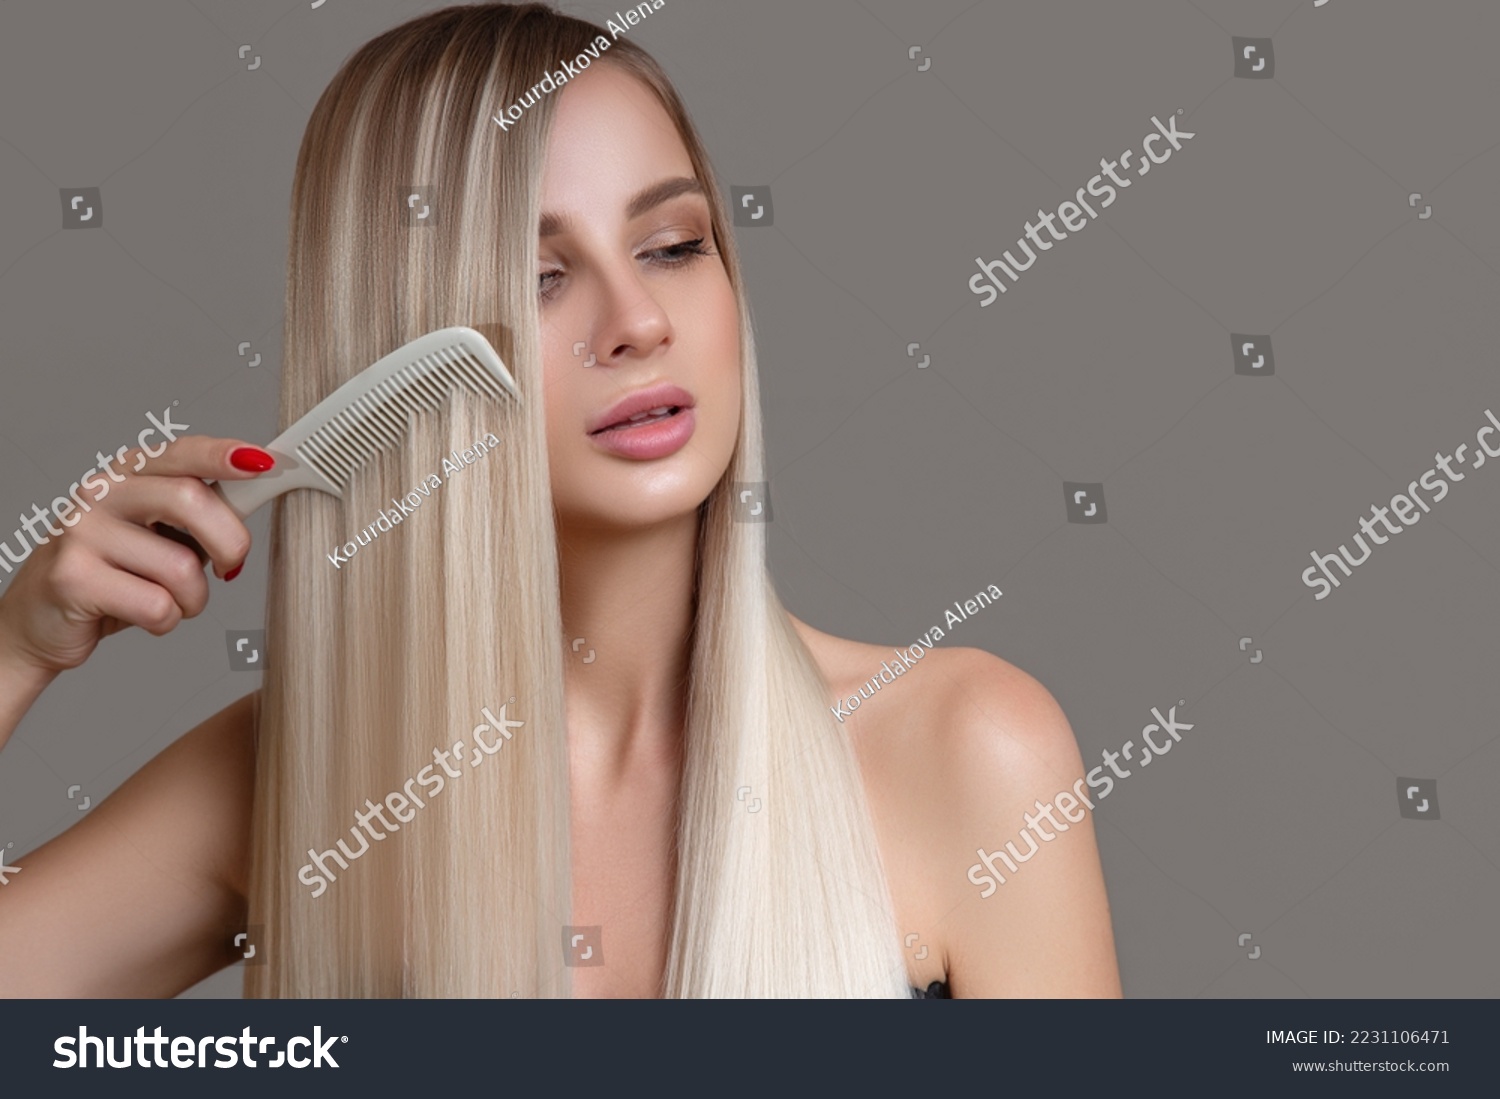 beautiful young woman holds a comb in her hands. Blonde woman with long straight hair on a gray background #2231106471